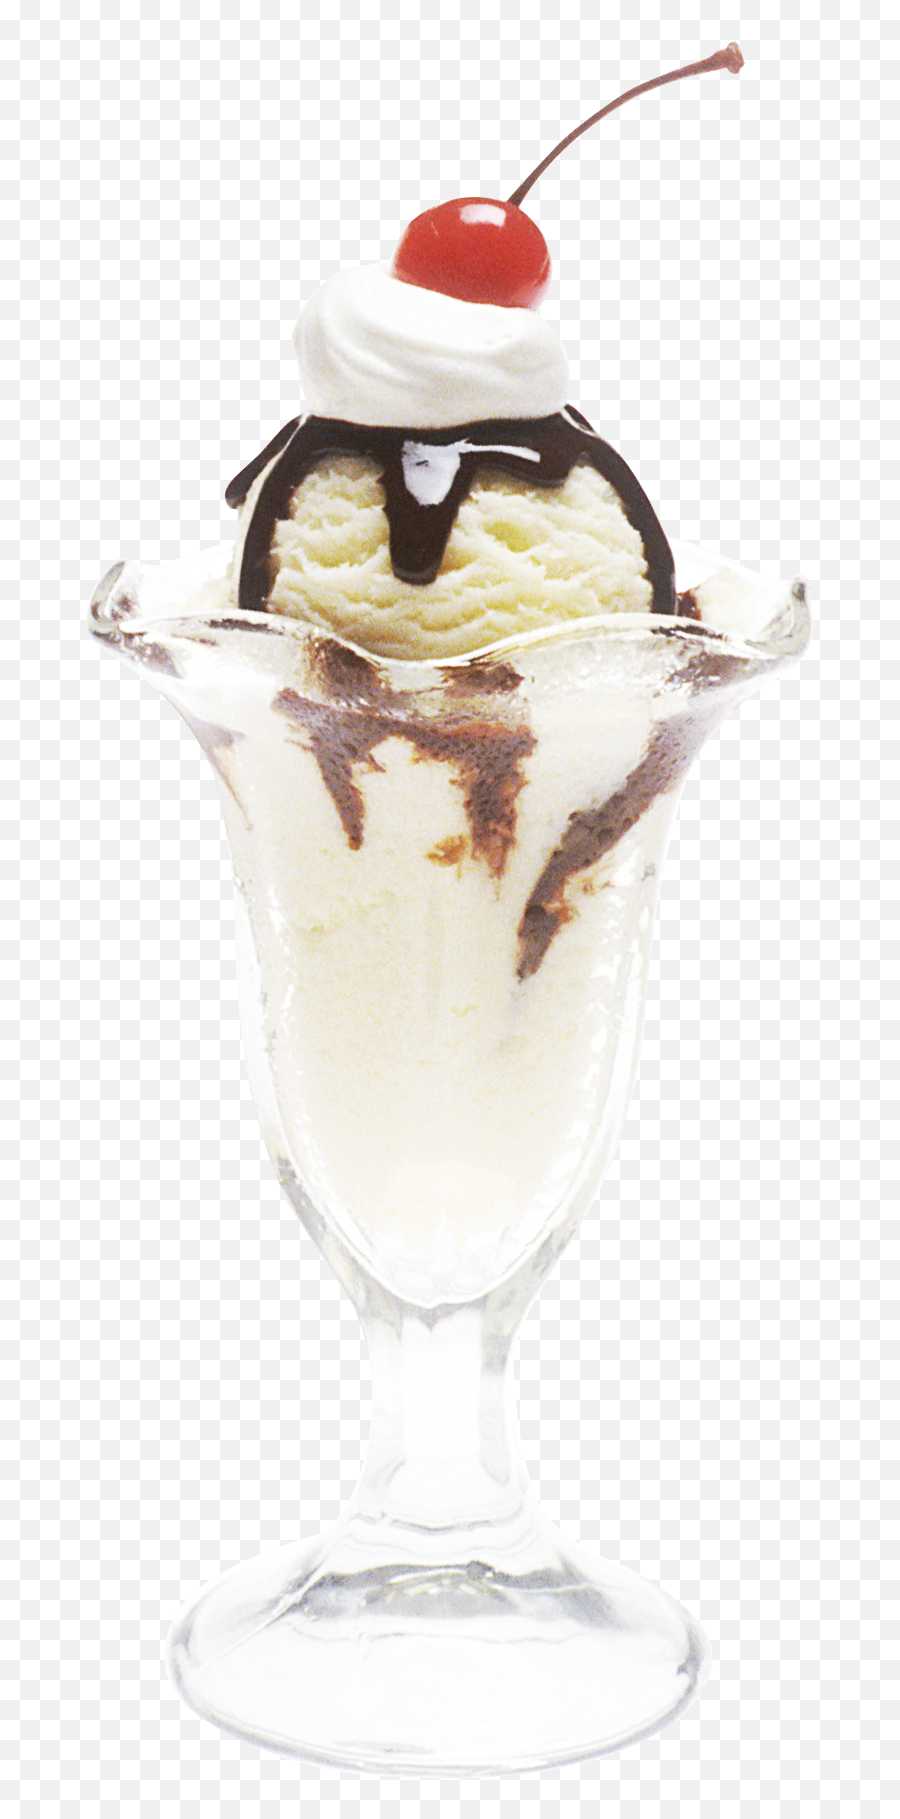 Ice Cream Png Transparent Image - Pngpix Soy Ice Cream,Ice Cream Png Transparent